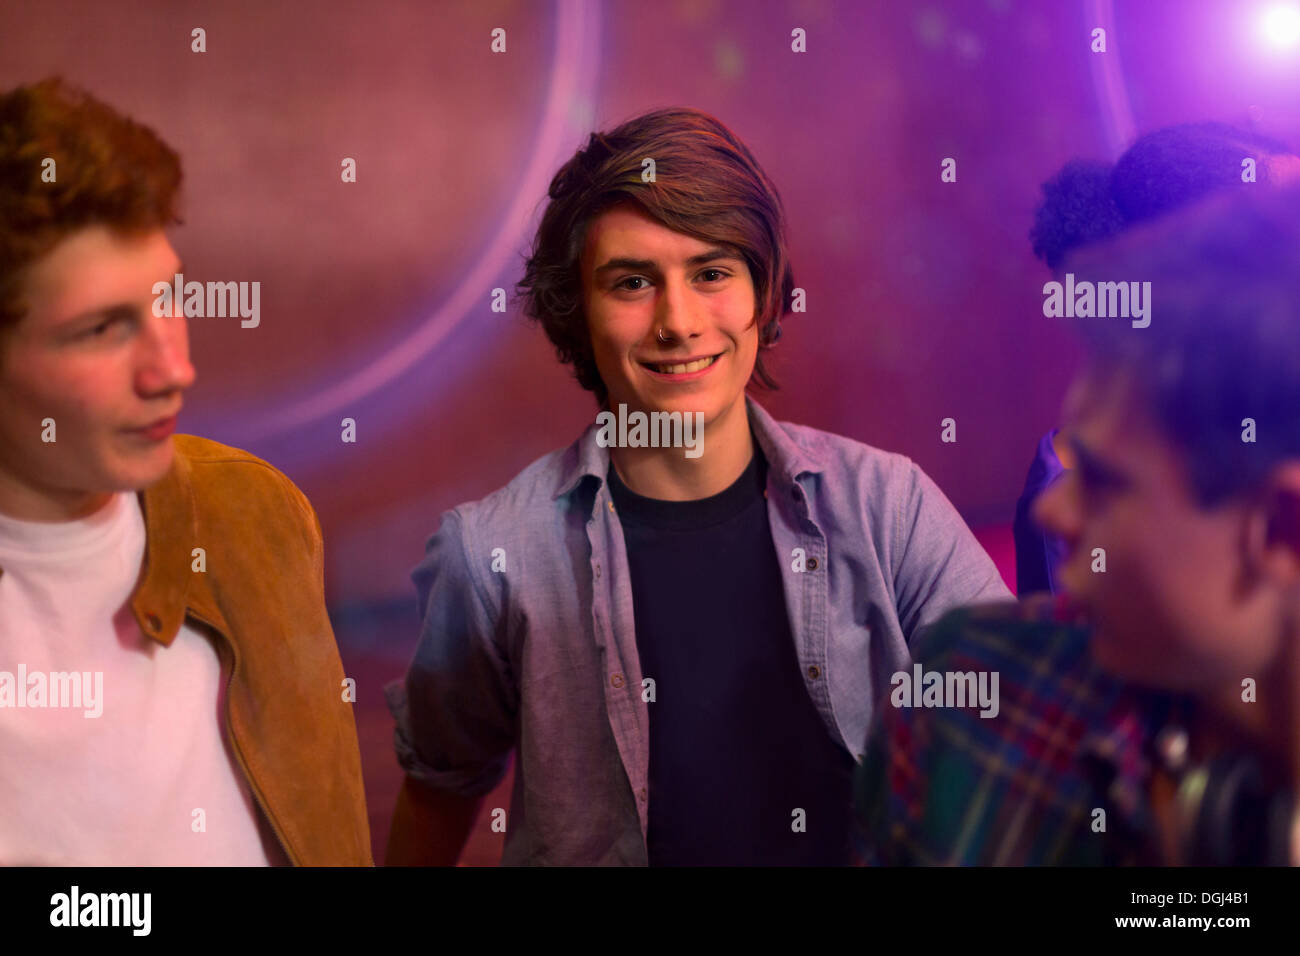 Teenage boys standing at party Stock Photo